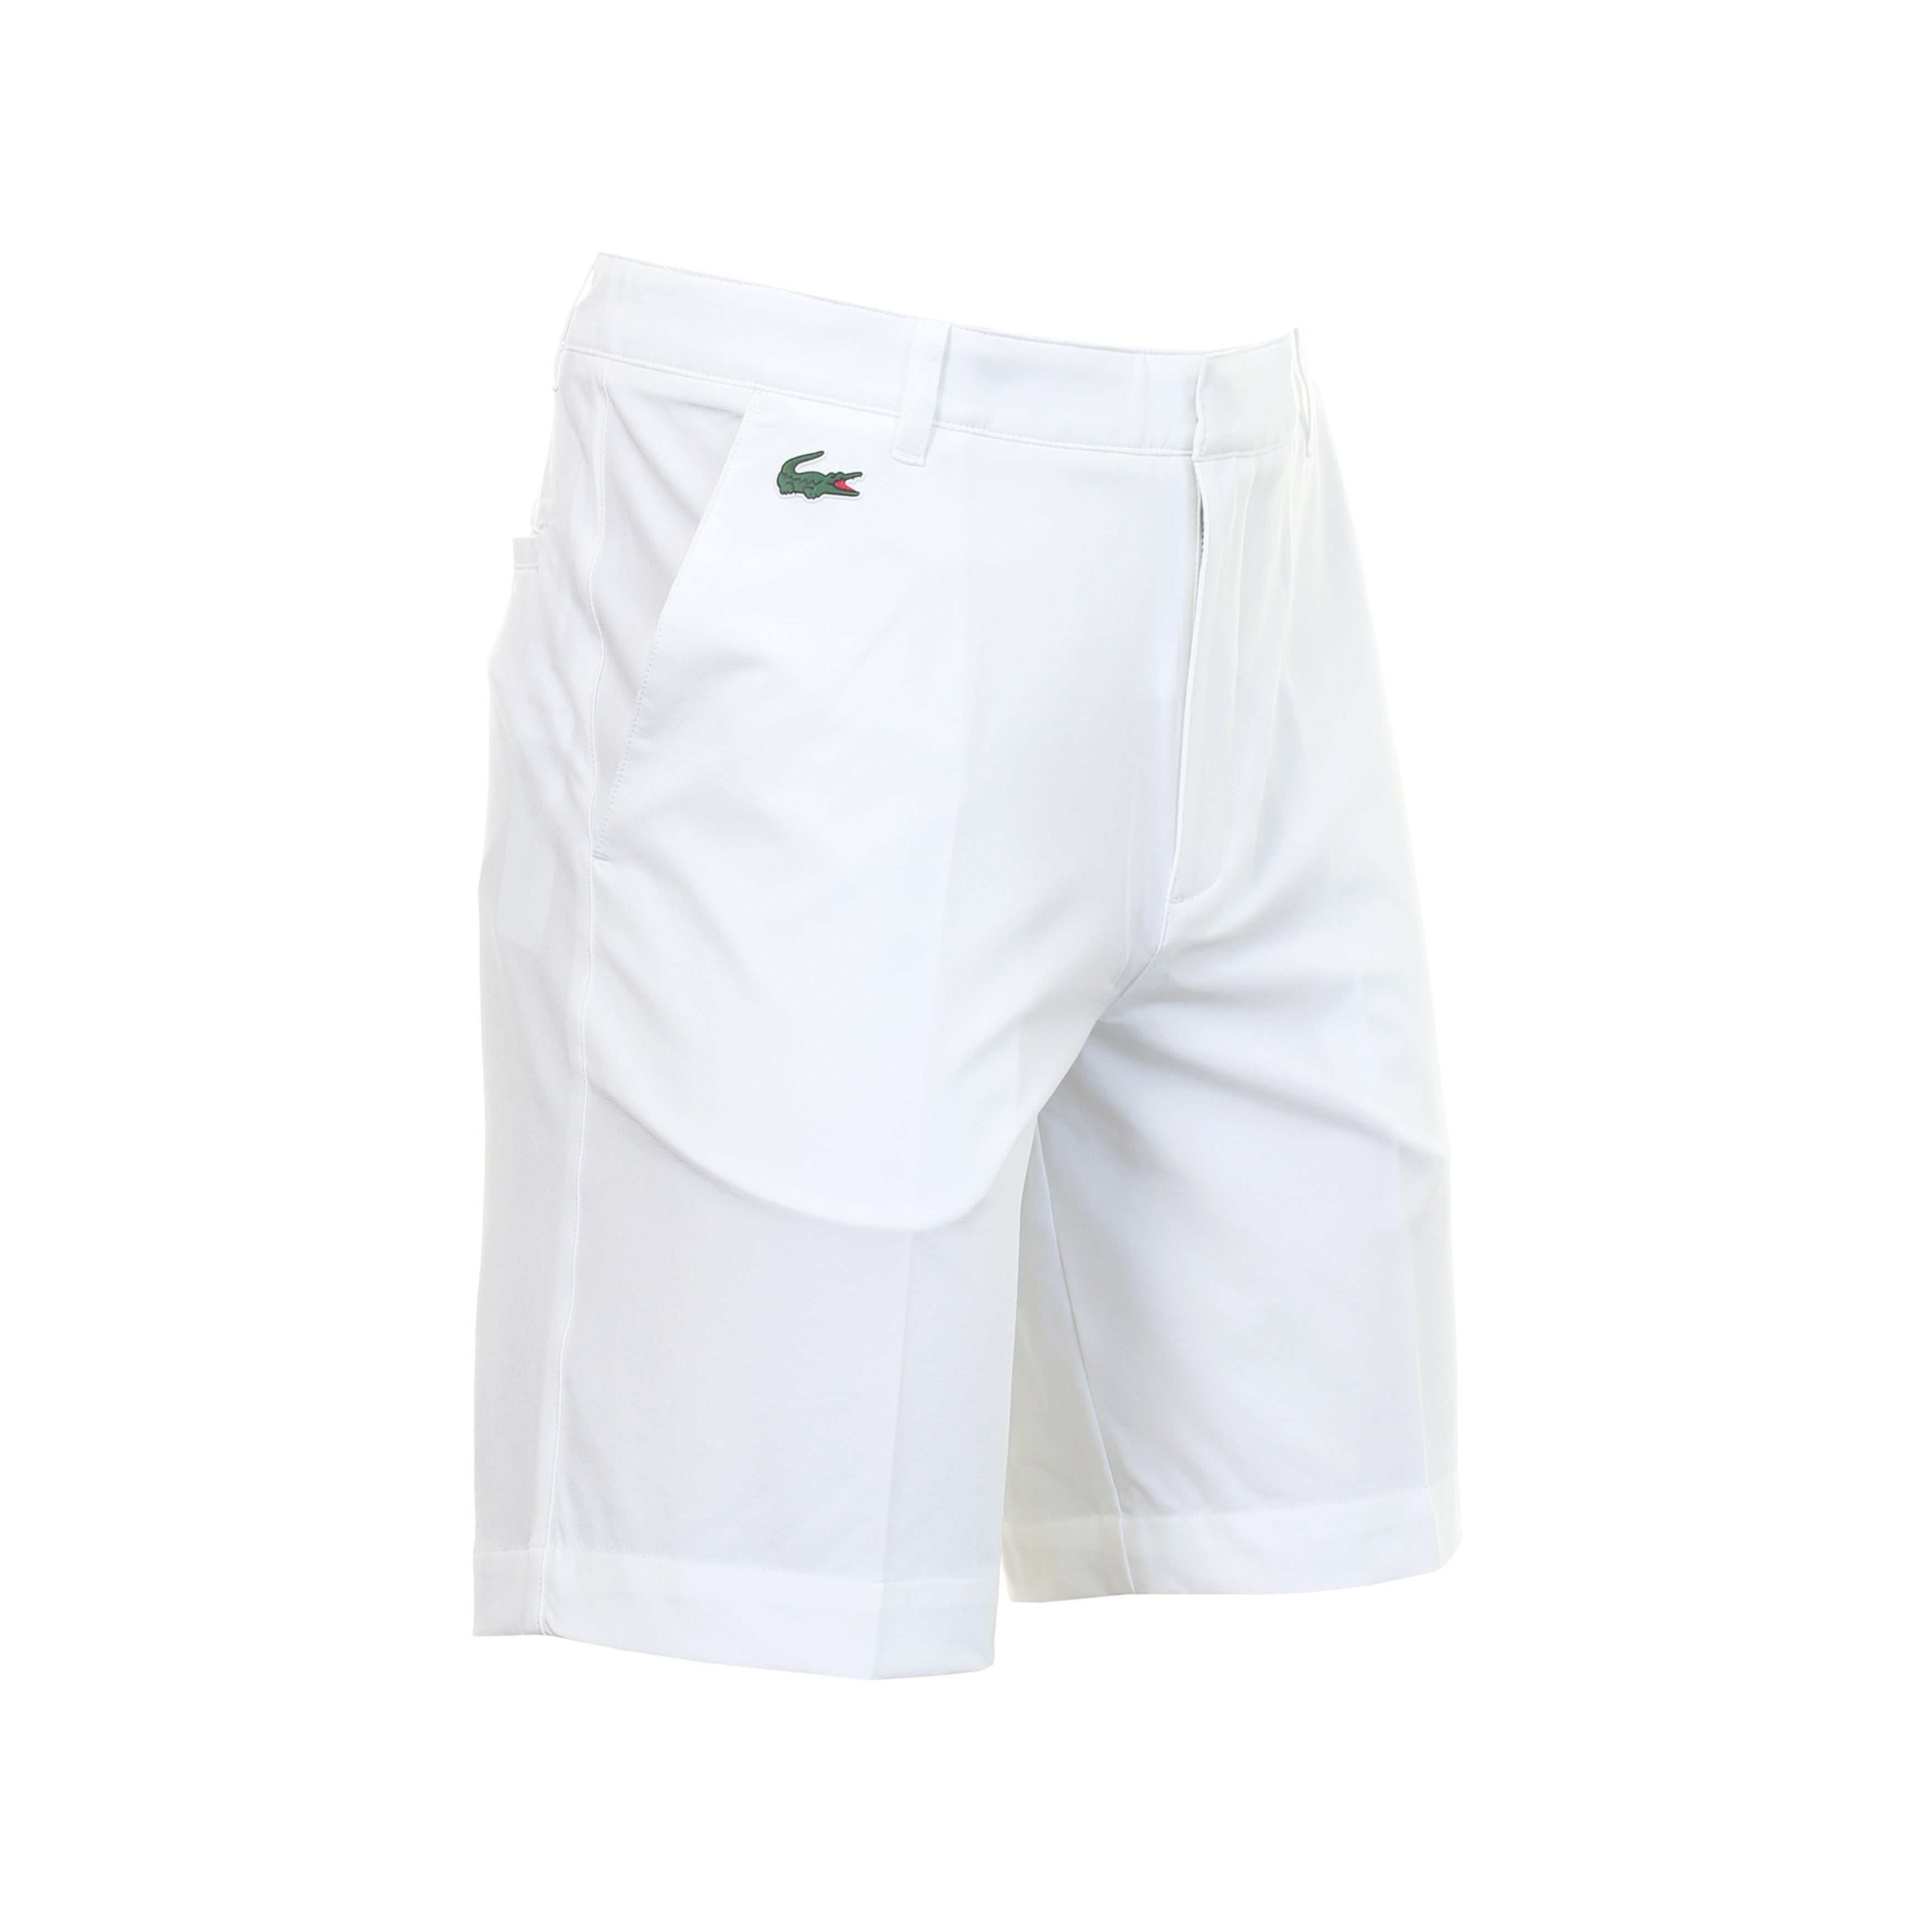 Lacoste Stretch Tech Short FH3764 White 001 | Function18